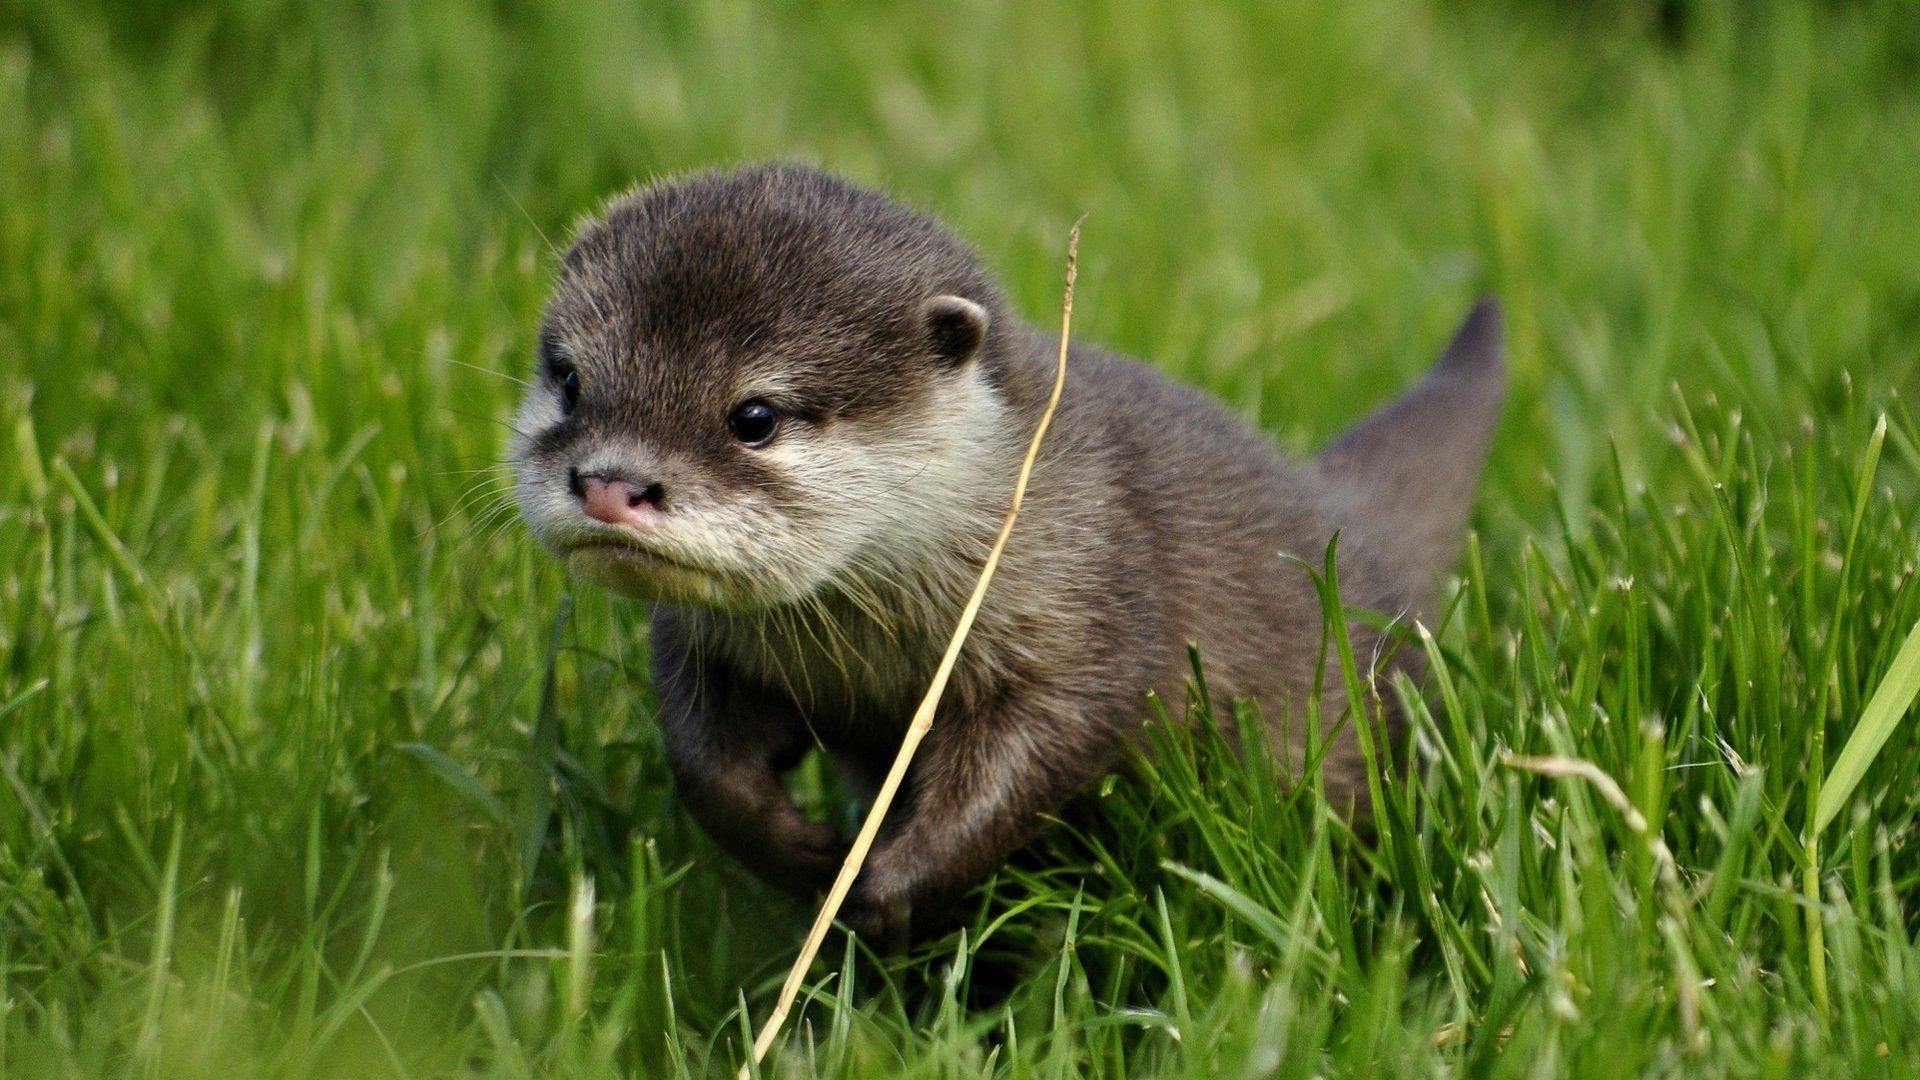 Young otter or wolf